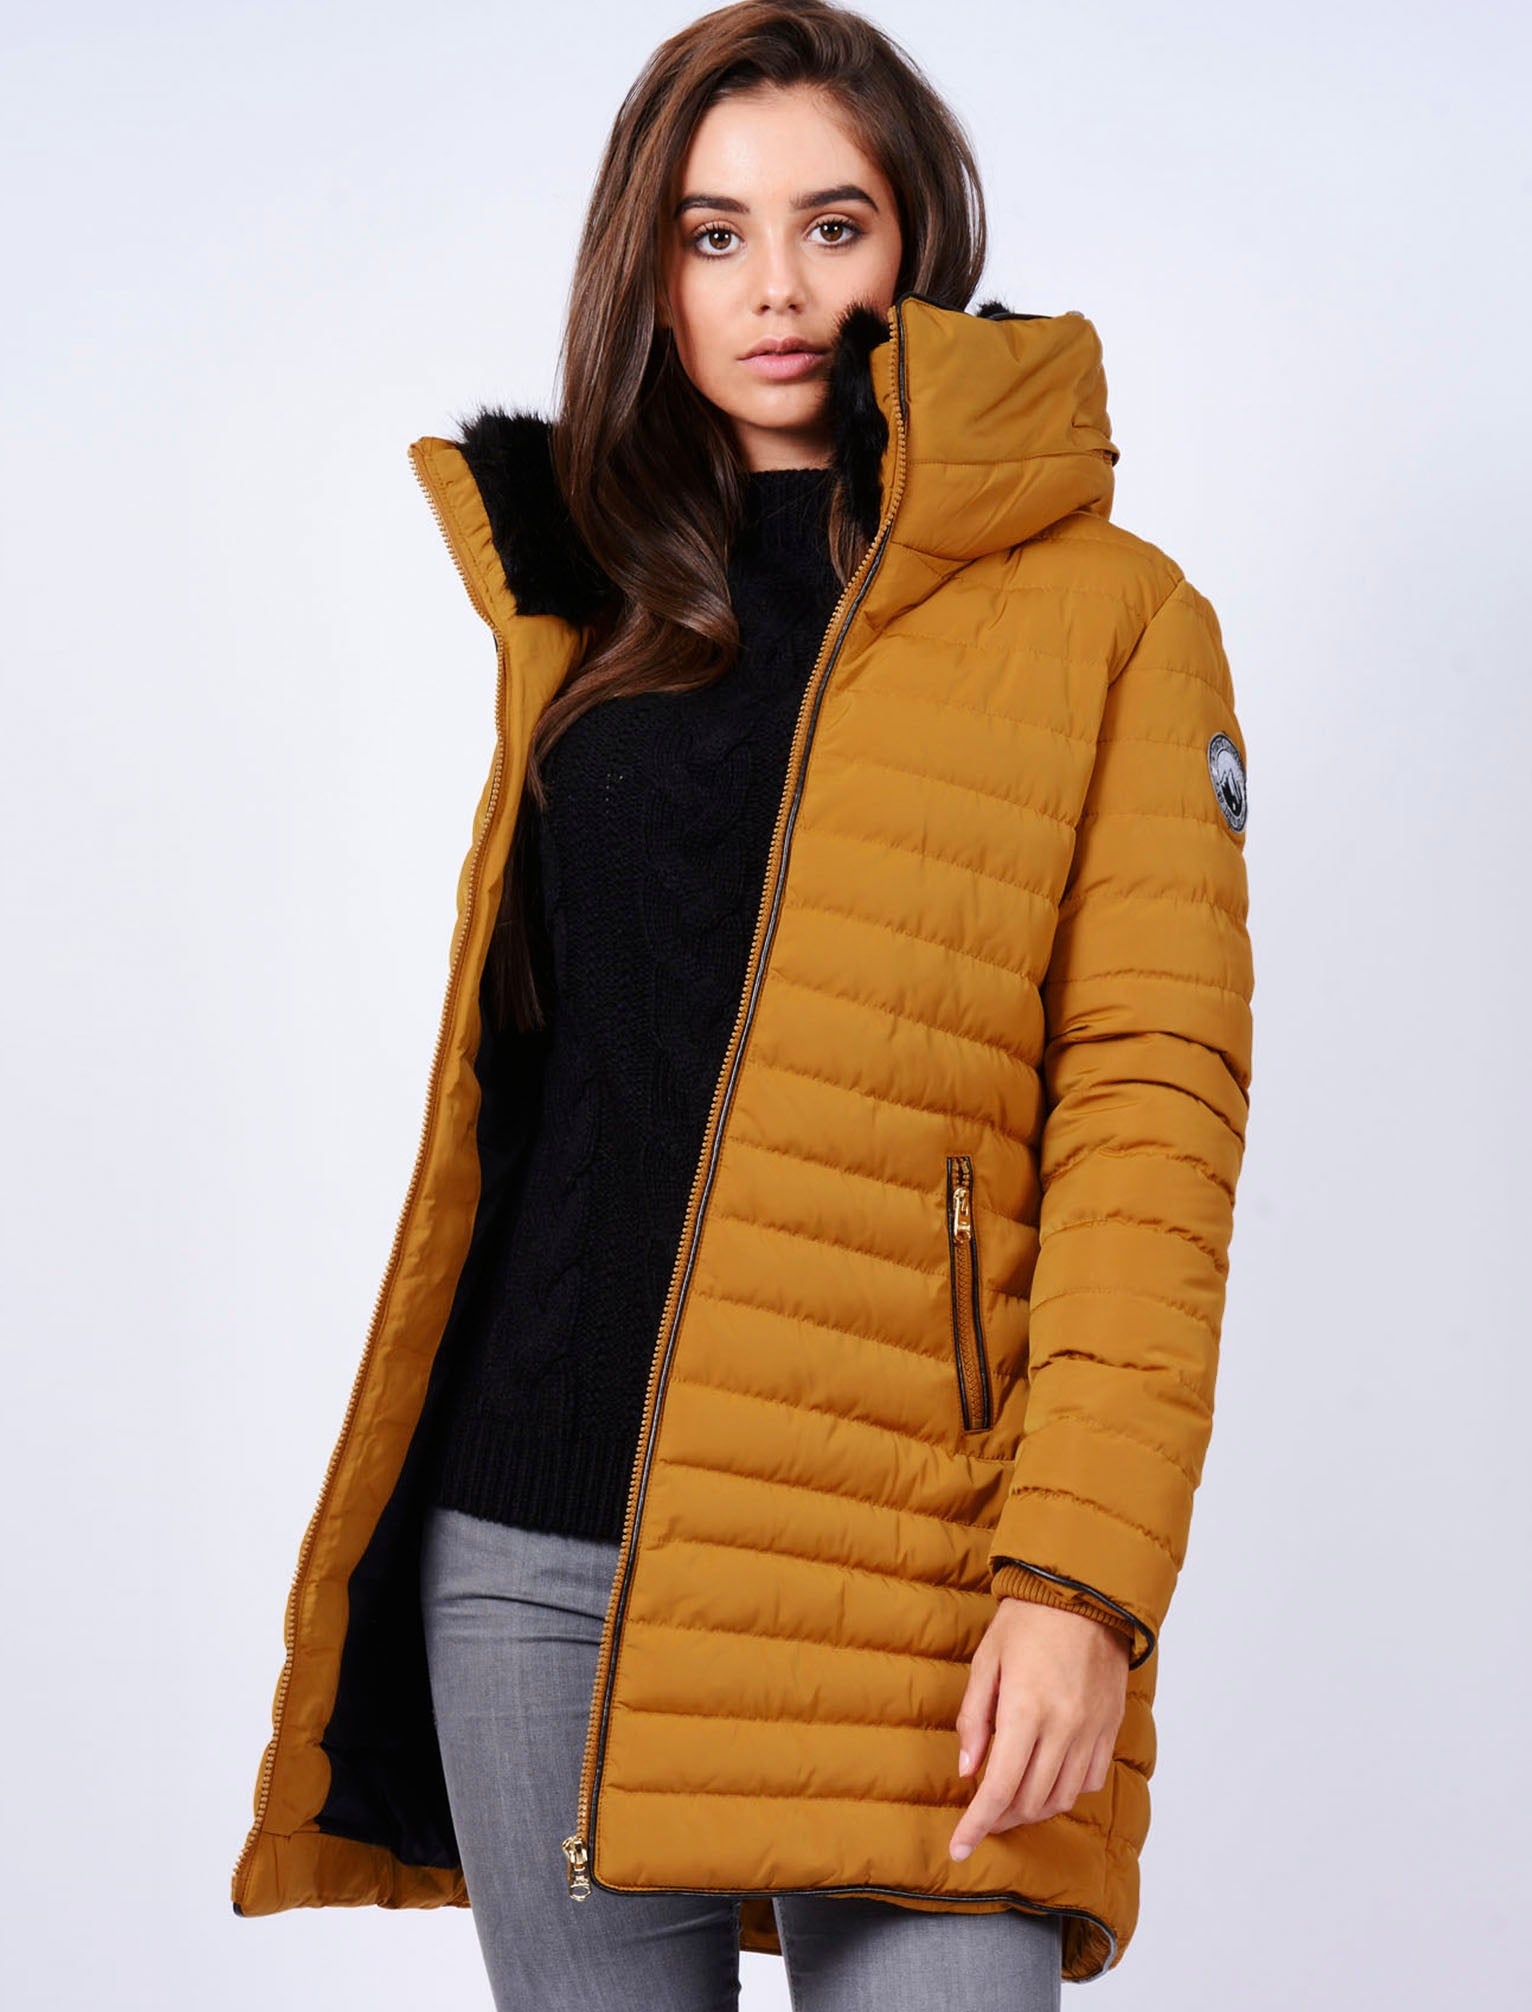 Clare V. - Tropezienne 8 in Mustard Quilted Puffer